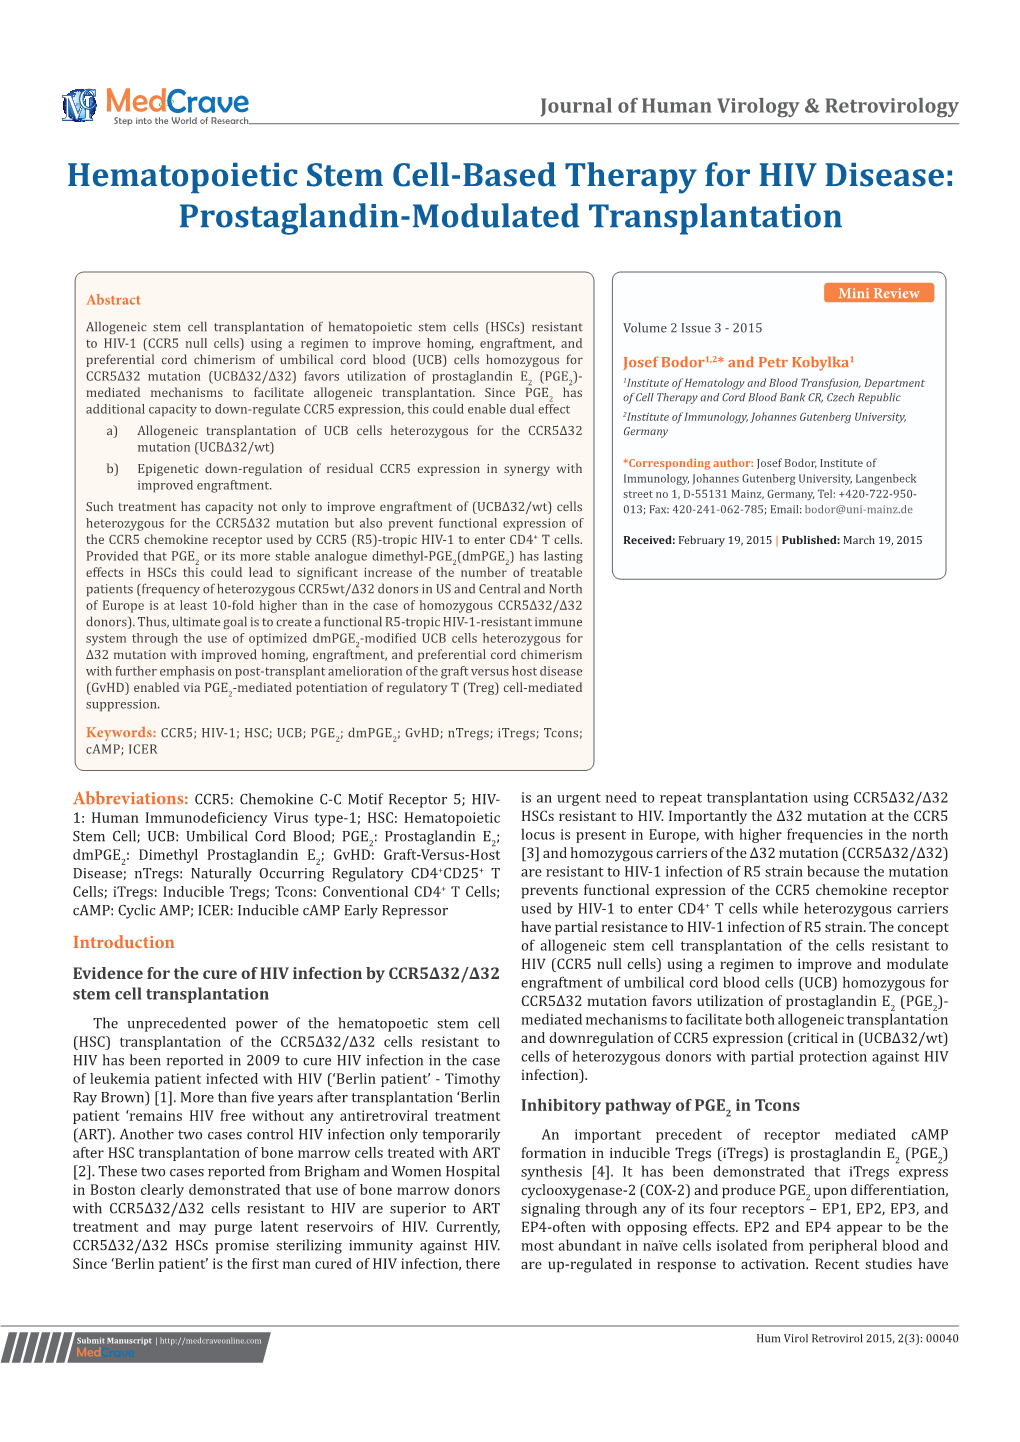 Hematopoietic Stem Cell-Based Therapy for HIV Disease: Prostaglandin-Modulated Transplantation